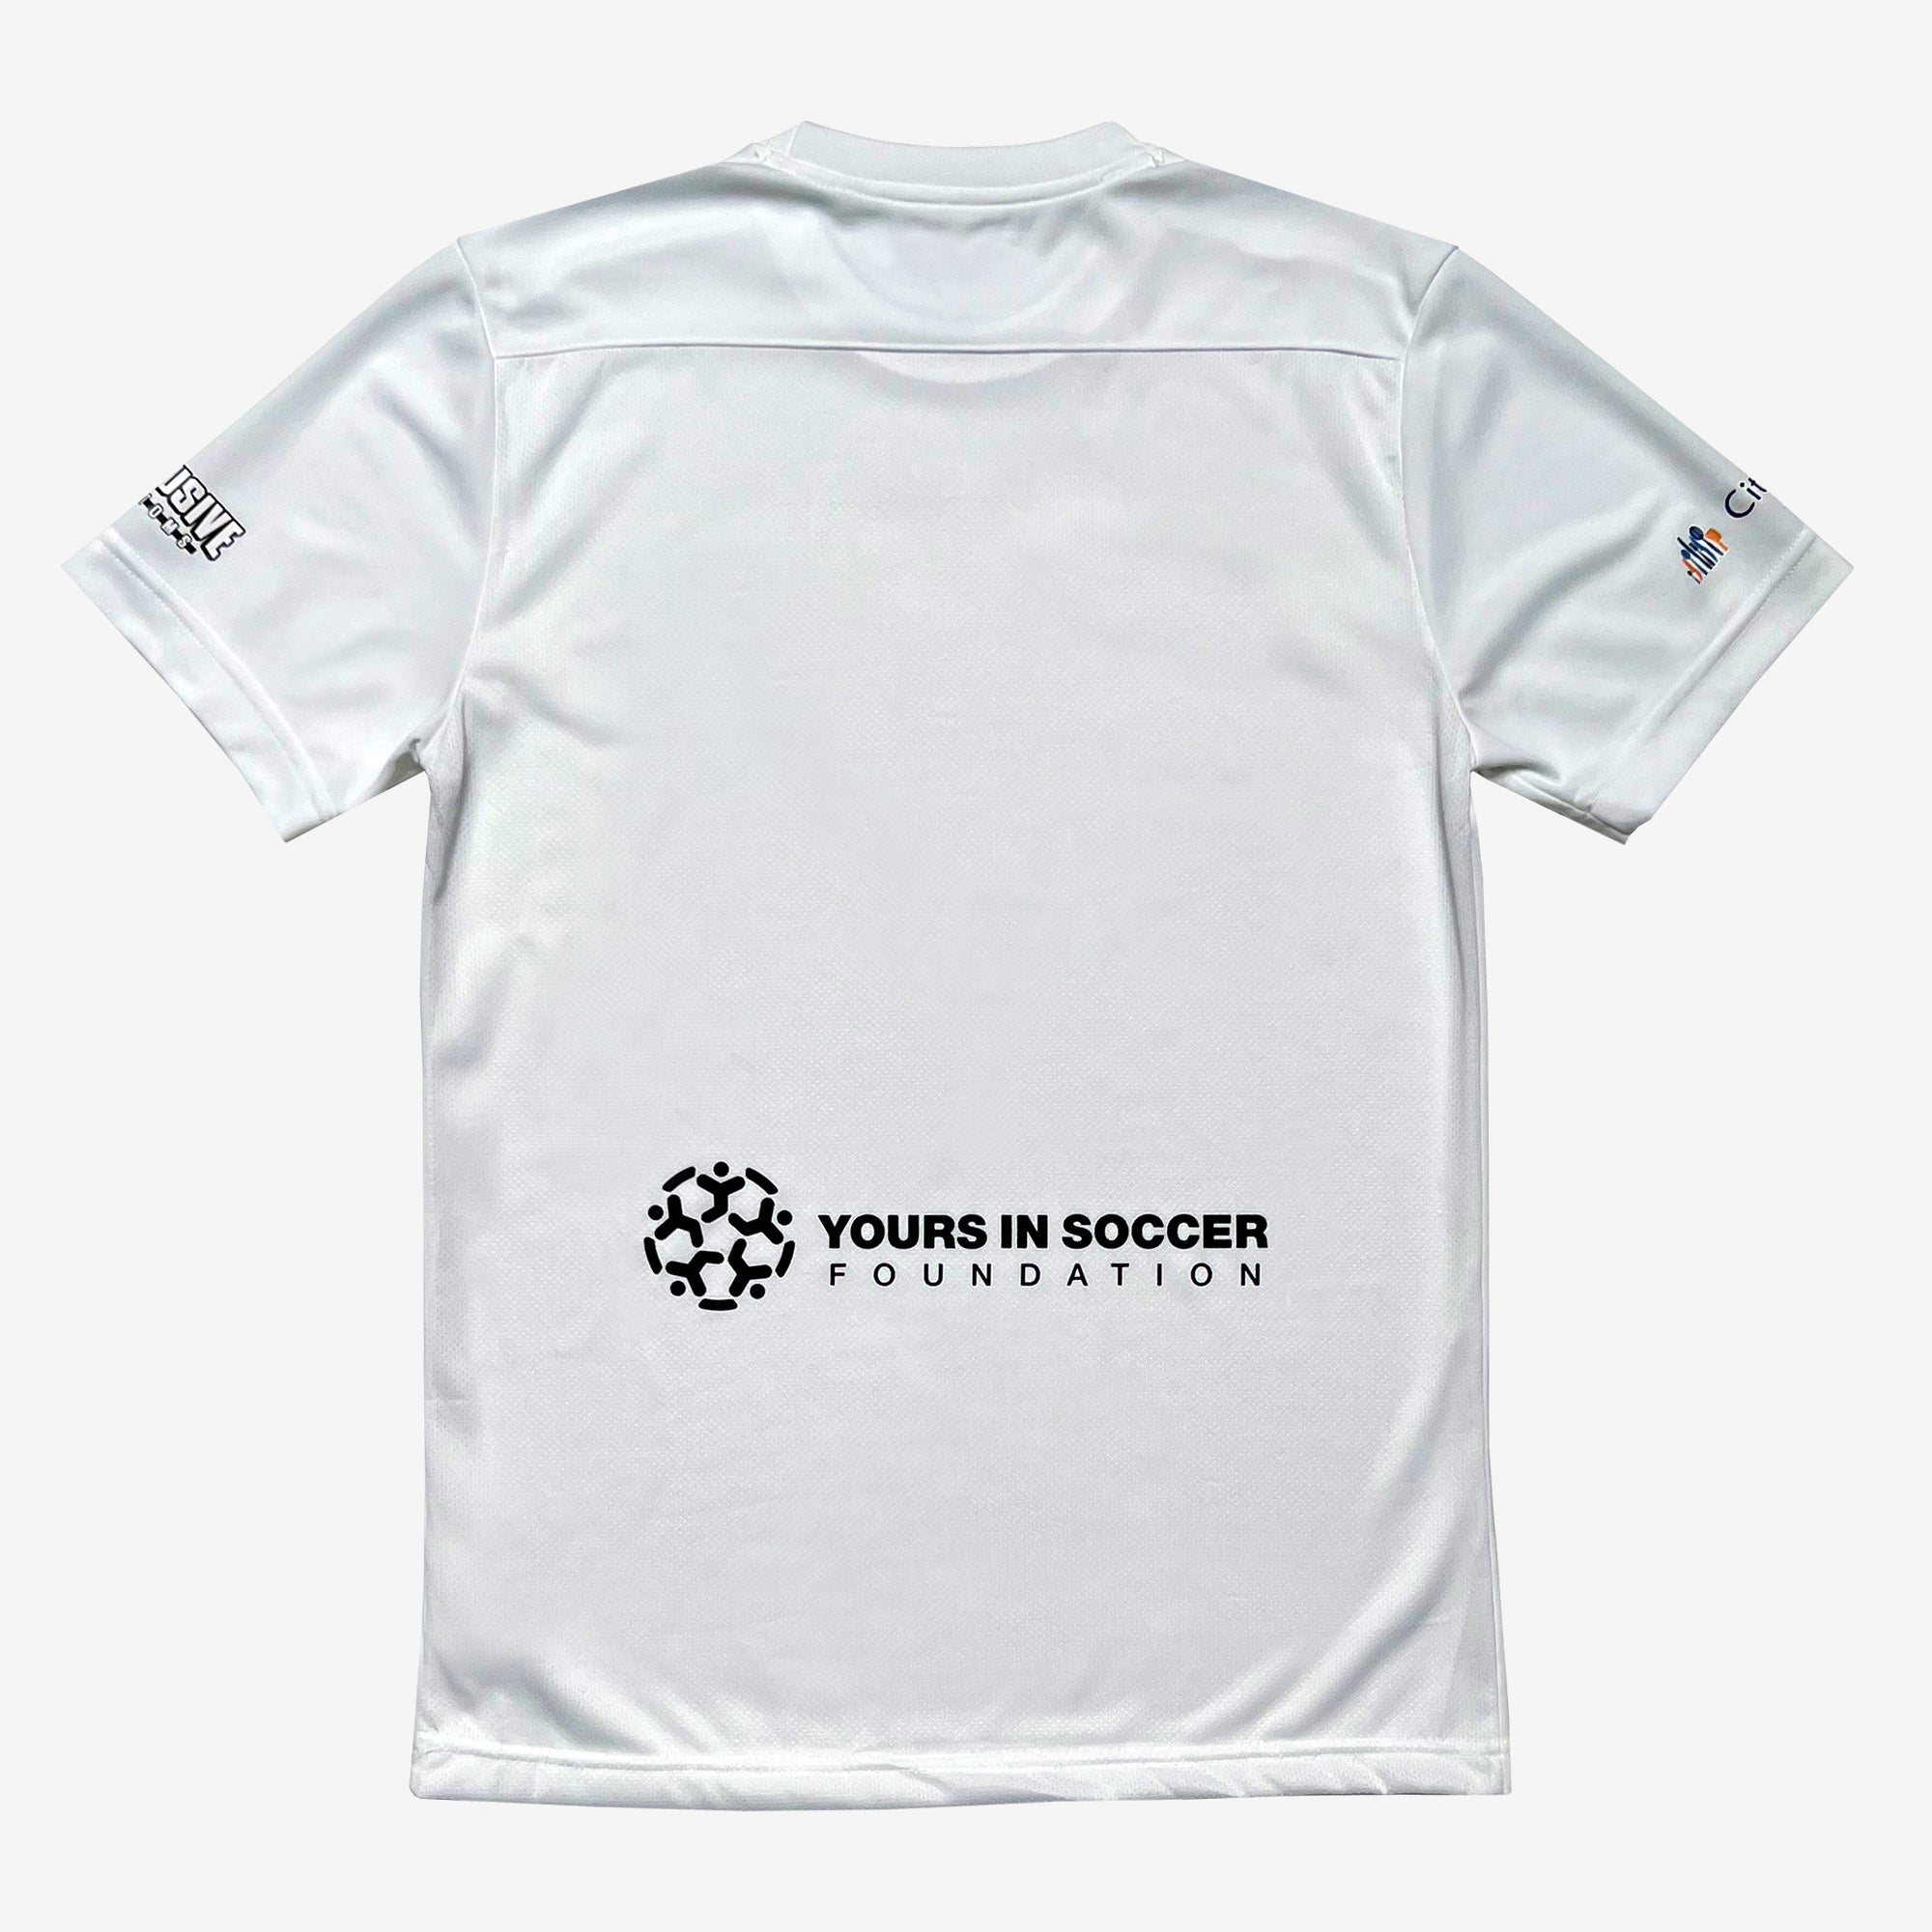 The back side of the white home game soccer jersey with the Yours in Soccer Foundation logo on the bottom.